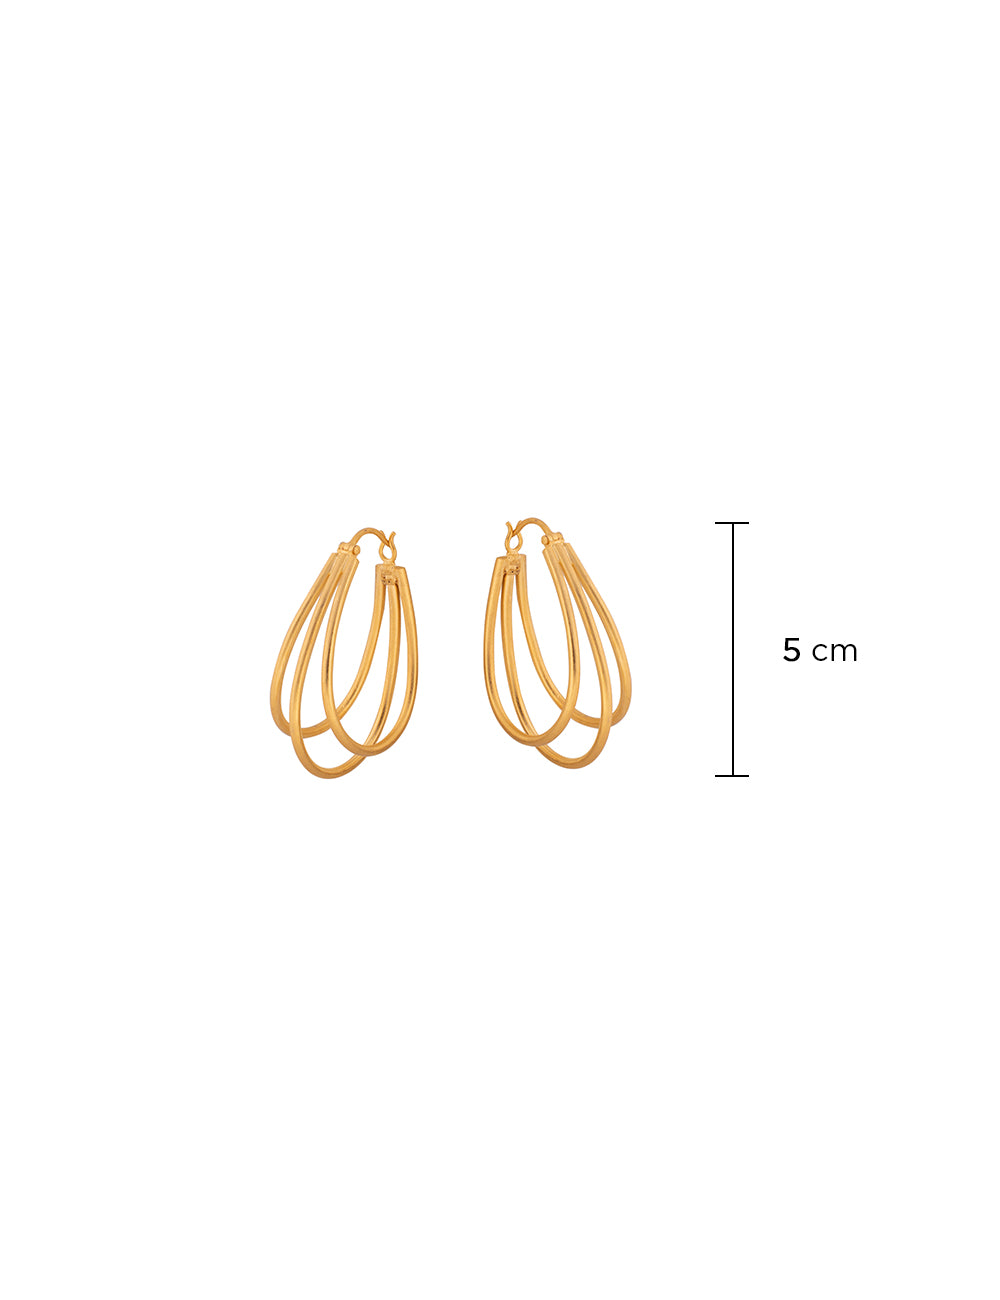 Configure Hoops-24K Gold Plated